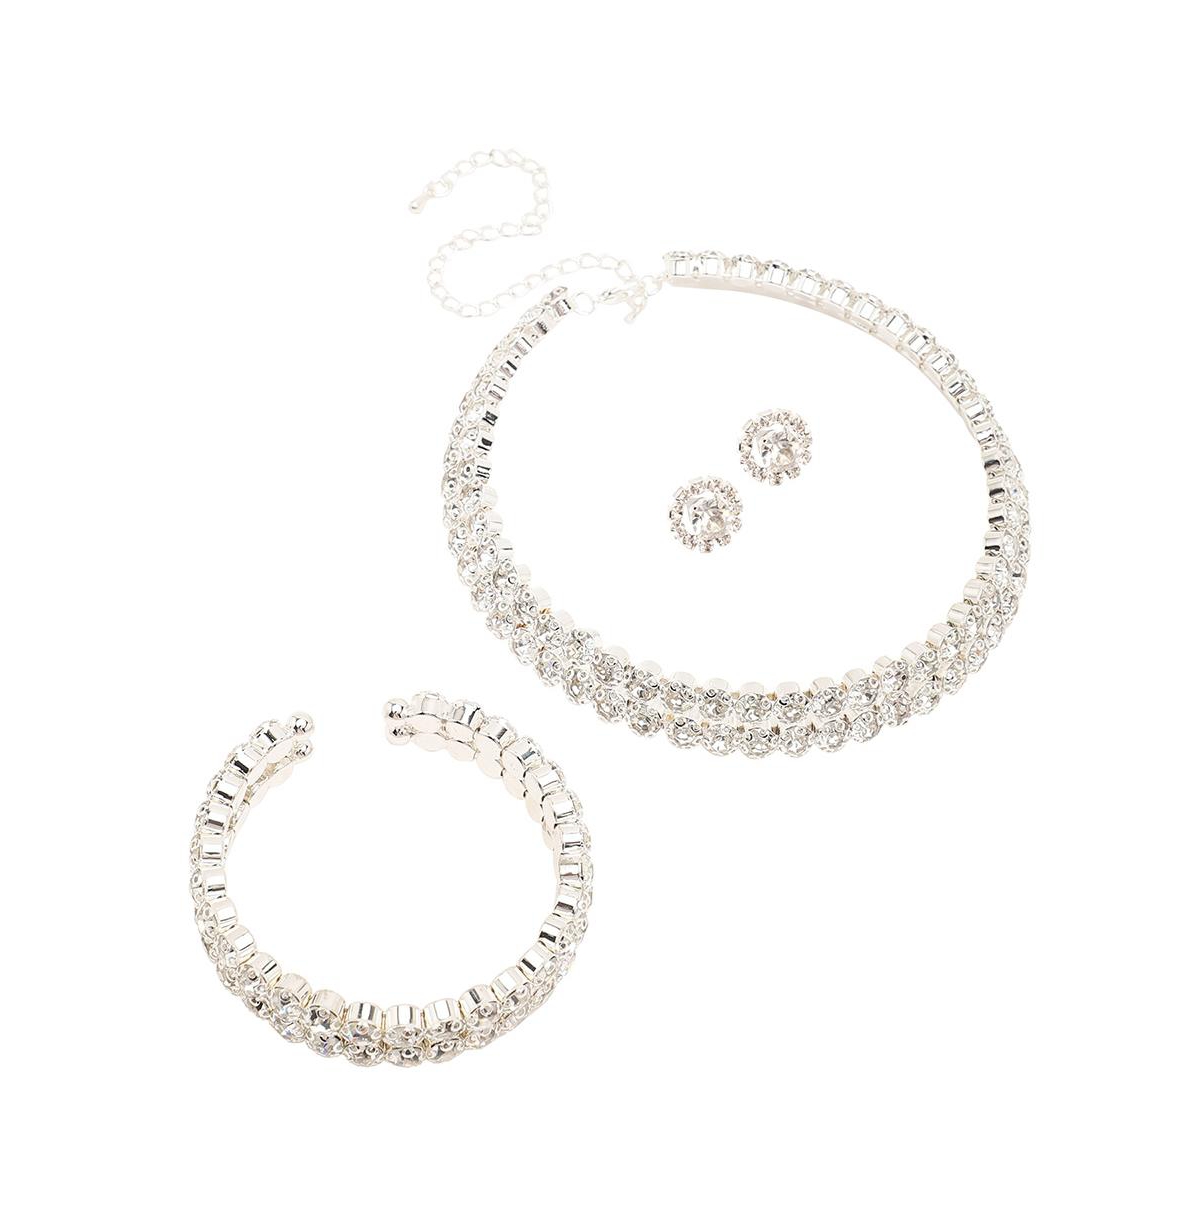 Sohi Women's Silver Embellished Strand Necklace, Earrings And Bracelet (set Of 3)